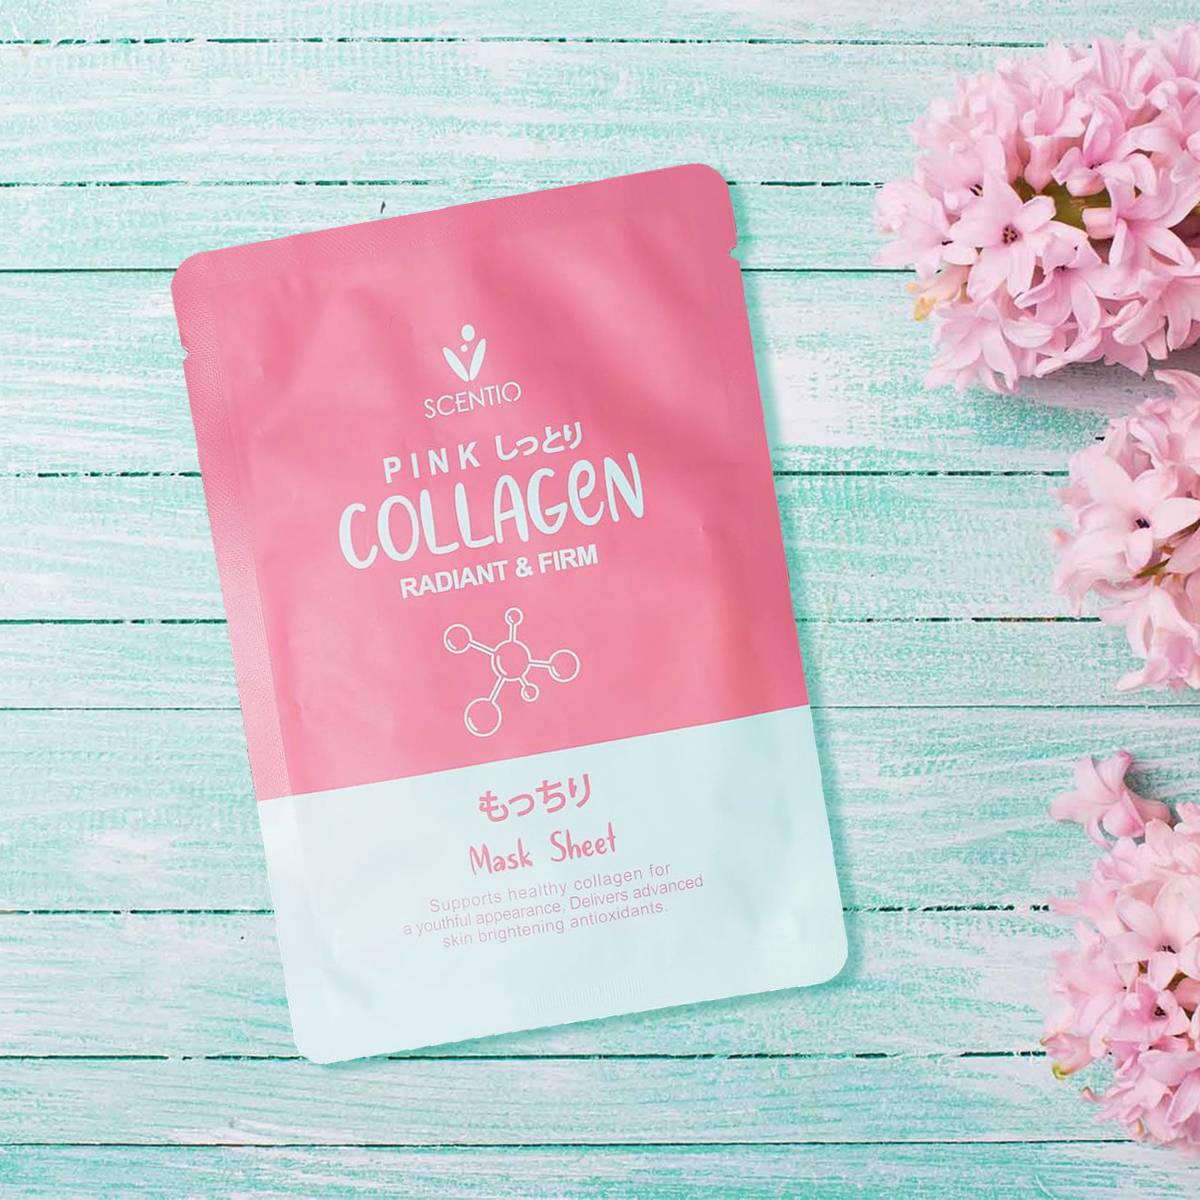 Beauty Buffet Scentio Pink Collagen Radiant & Firm Mask Sheet Skincare Whitening Facial Mask 1pcs